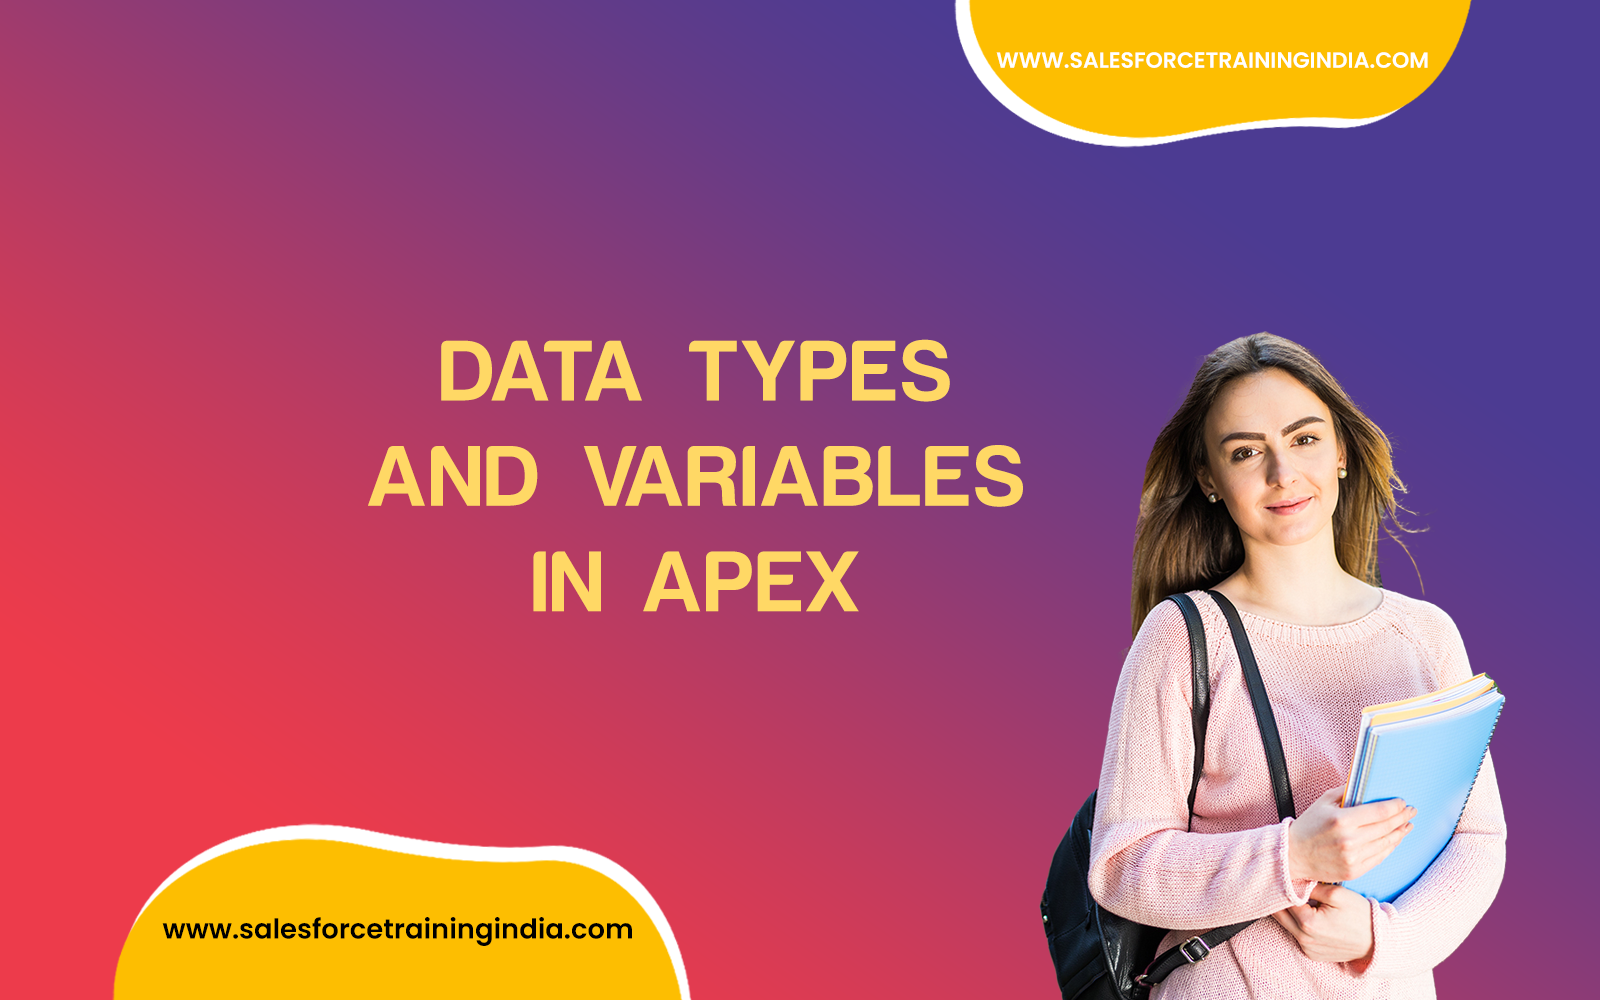 Data Types and Variables in Apex